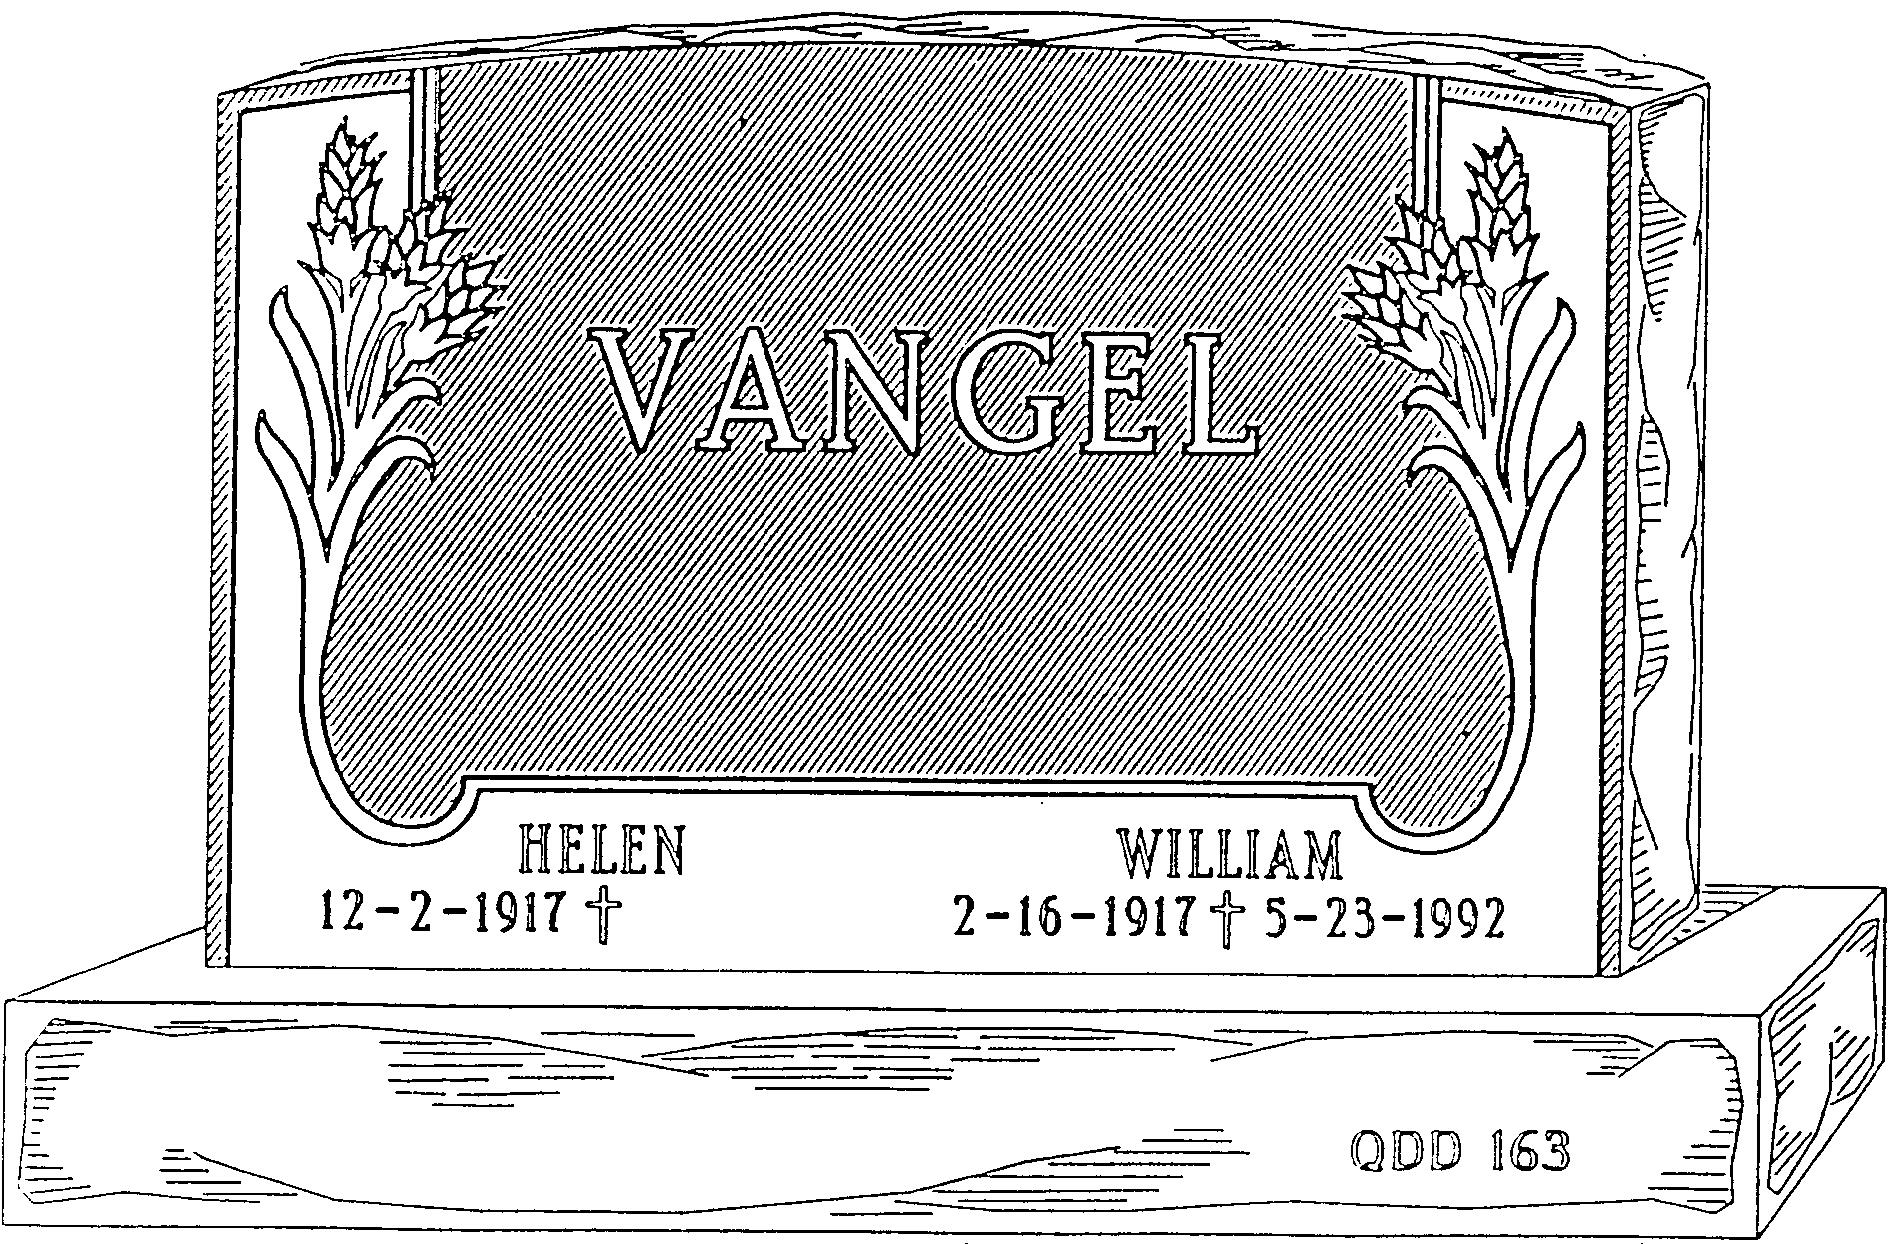 a black and white drawing of a gravestone for vangelis